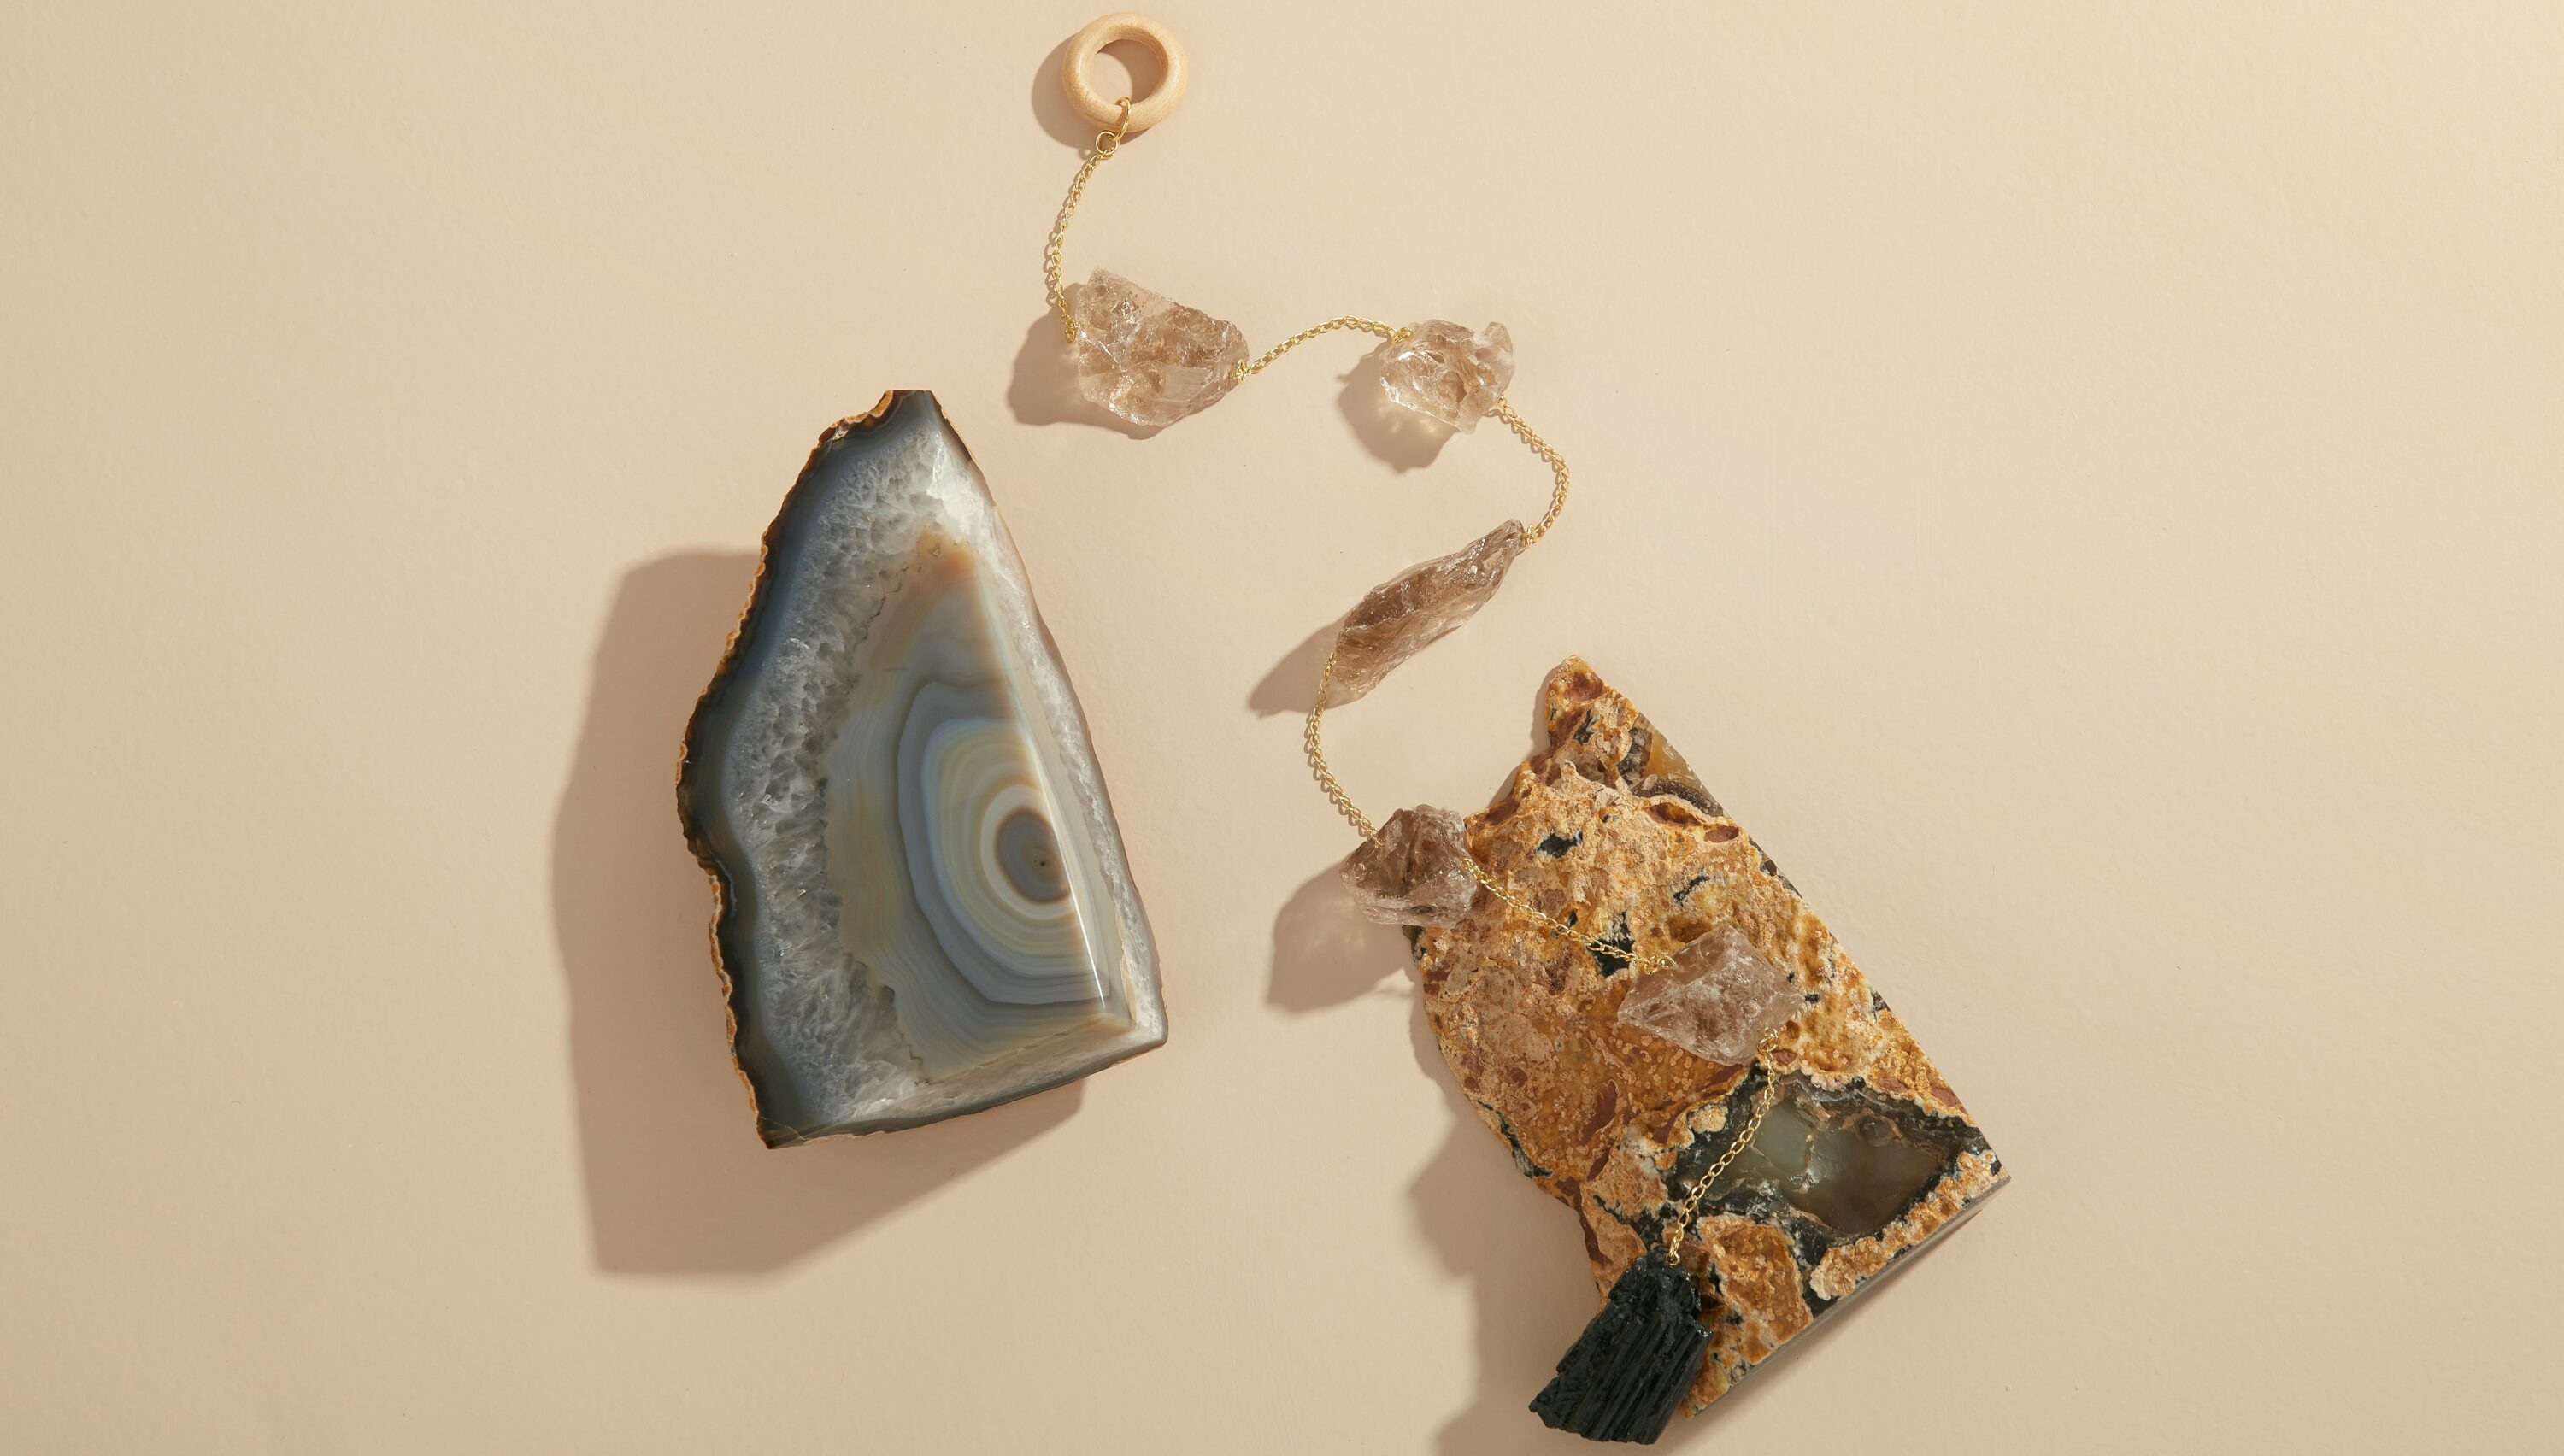 Natural agate bookends and a smoky quartz wall hanging creating sanctuary